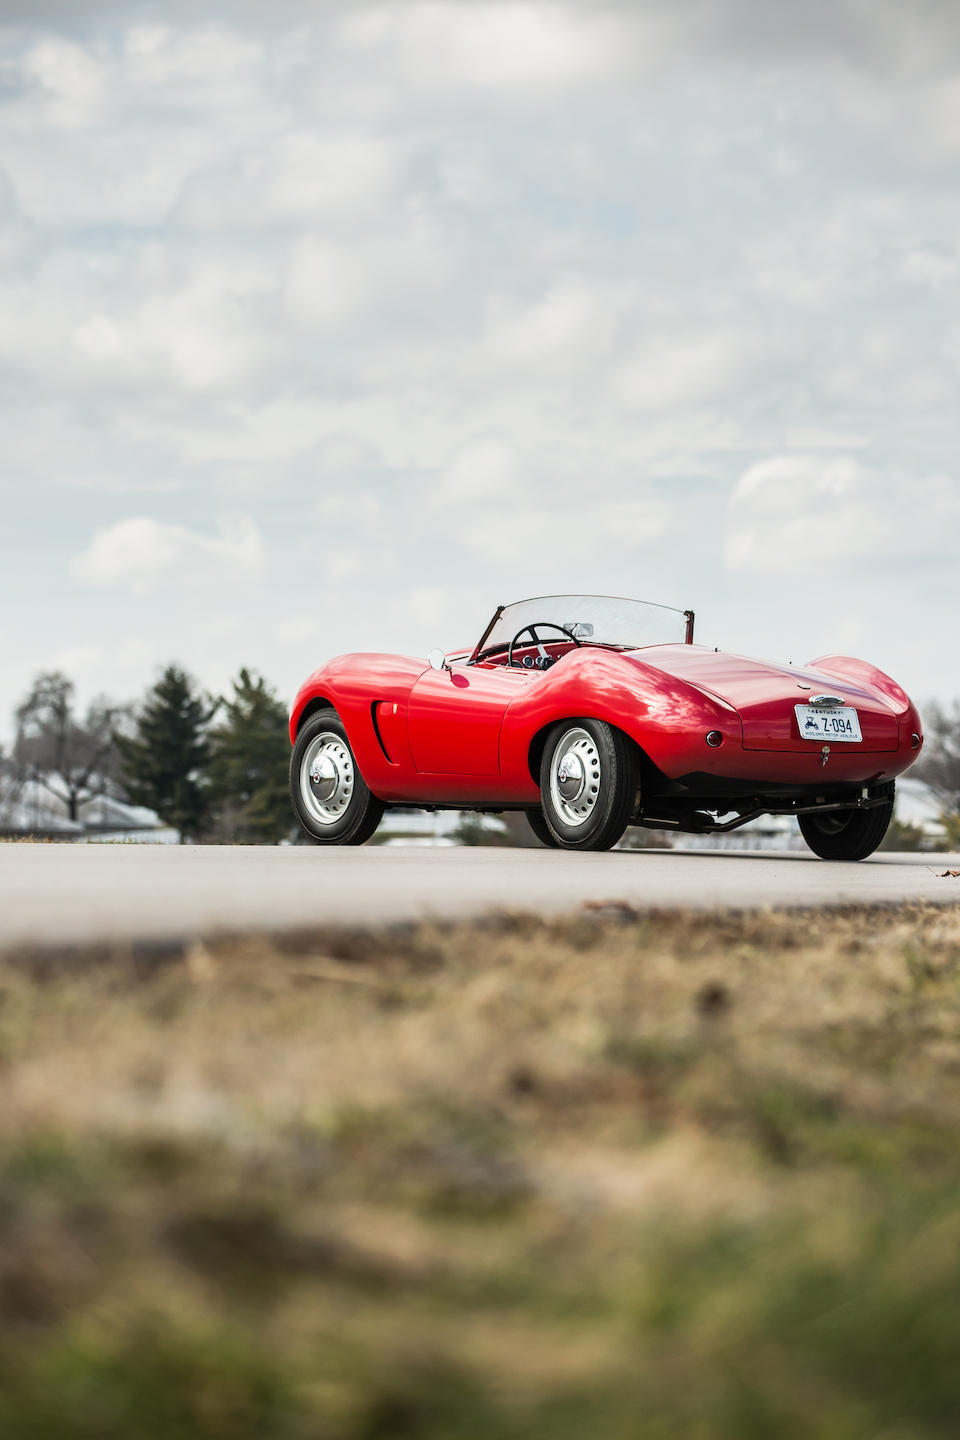 <b>1954 Arnolt Bristol Prototype Roadster</b><br />Chassis no. 404X3000<br />Engine no. 100D 754